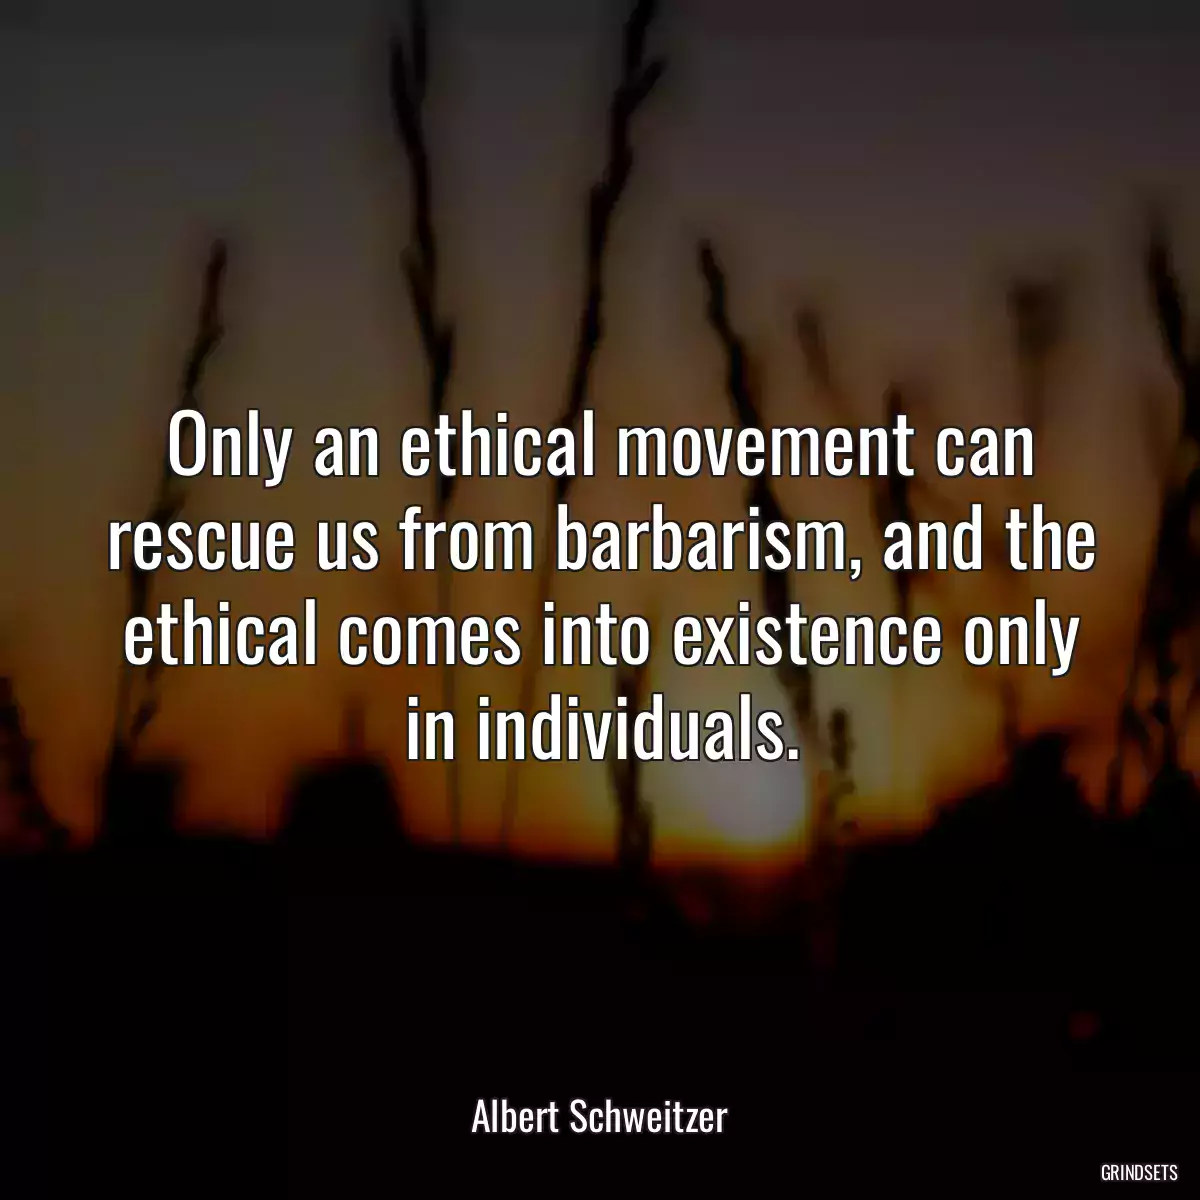 Only an ethical movement can rescue us from barbarism, and the ethical comes into existence only in individuals.